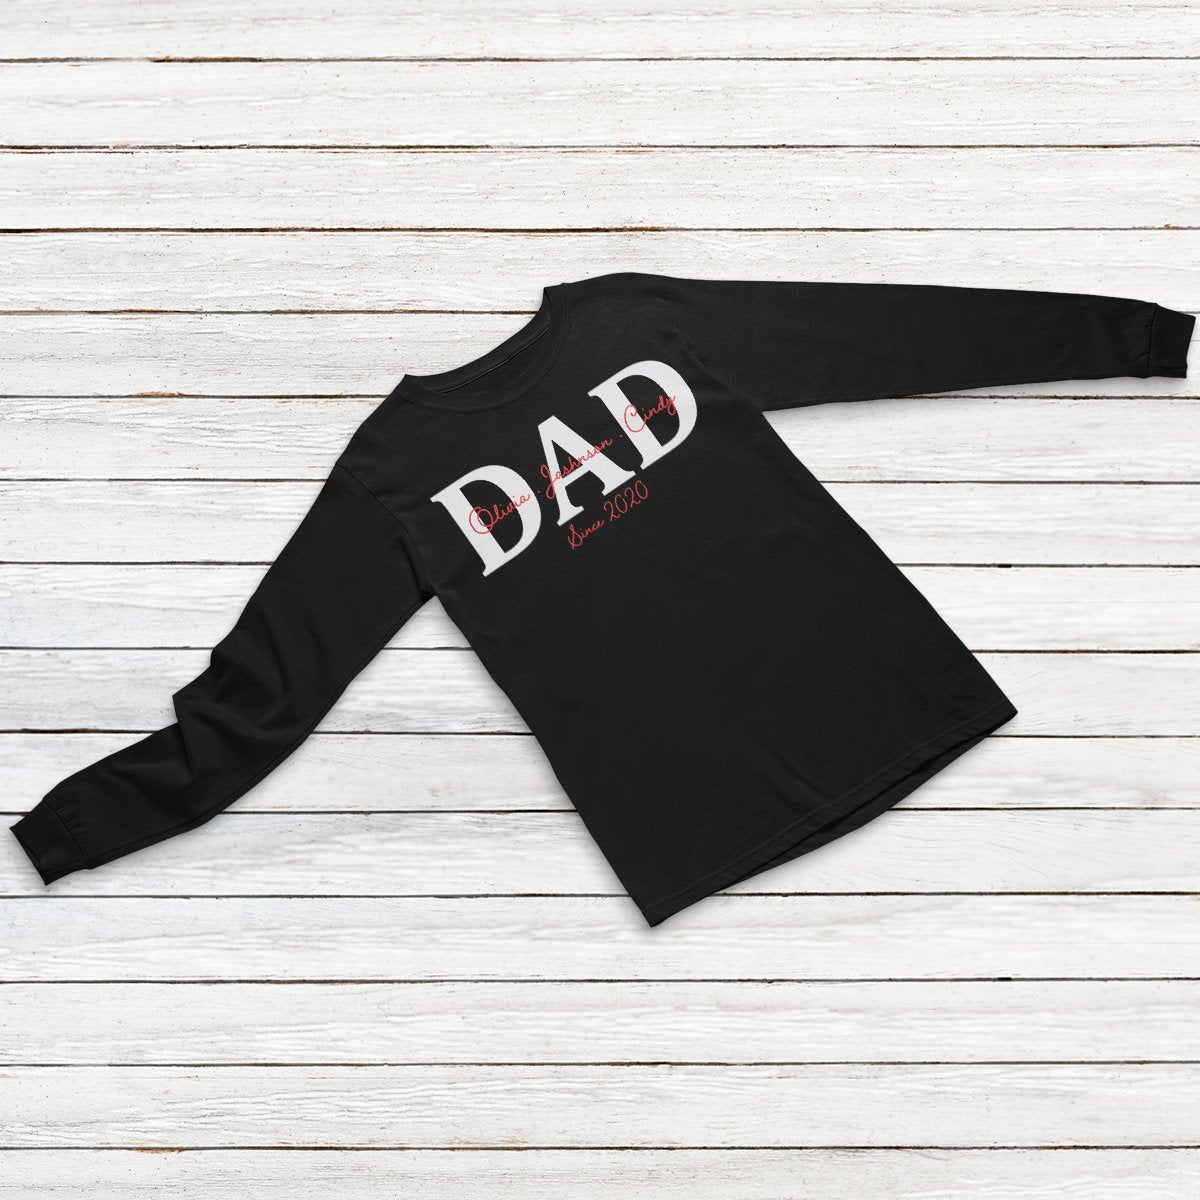 Dad, Custom Text Personalized Shirt